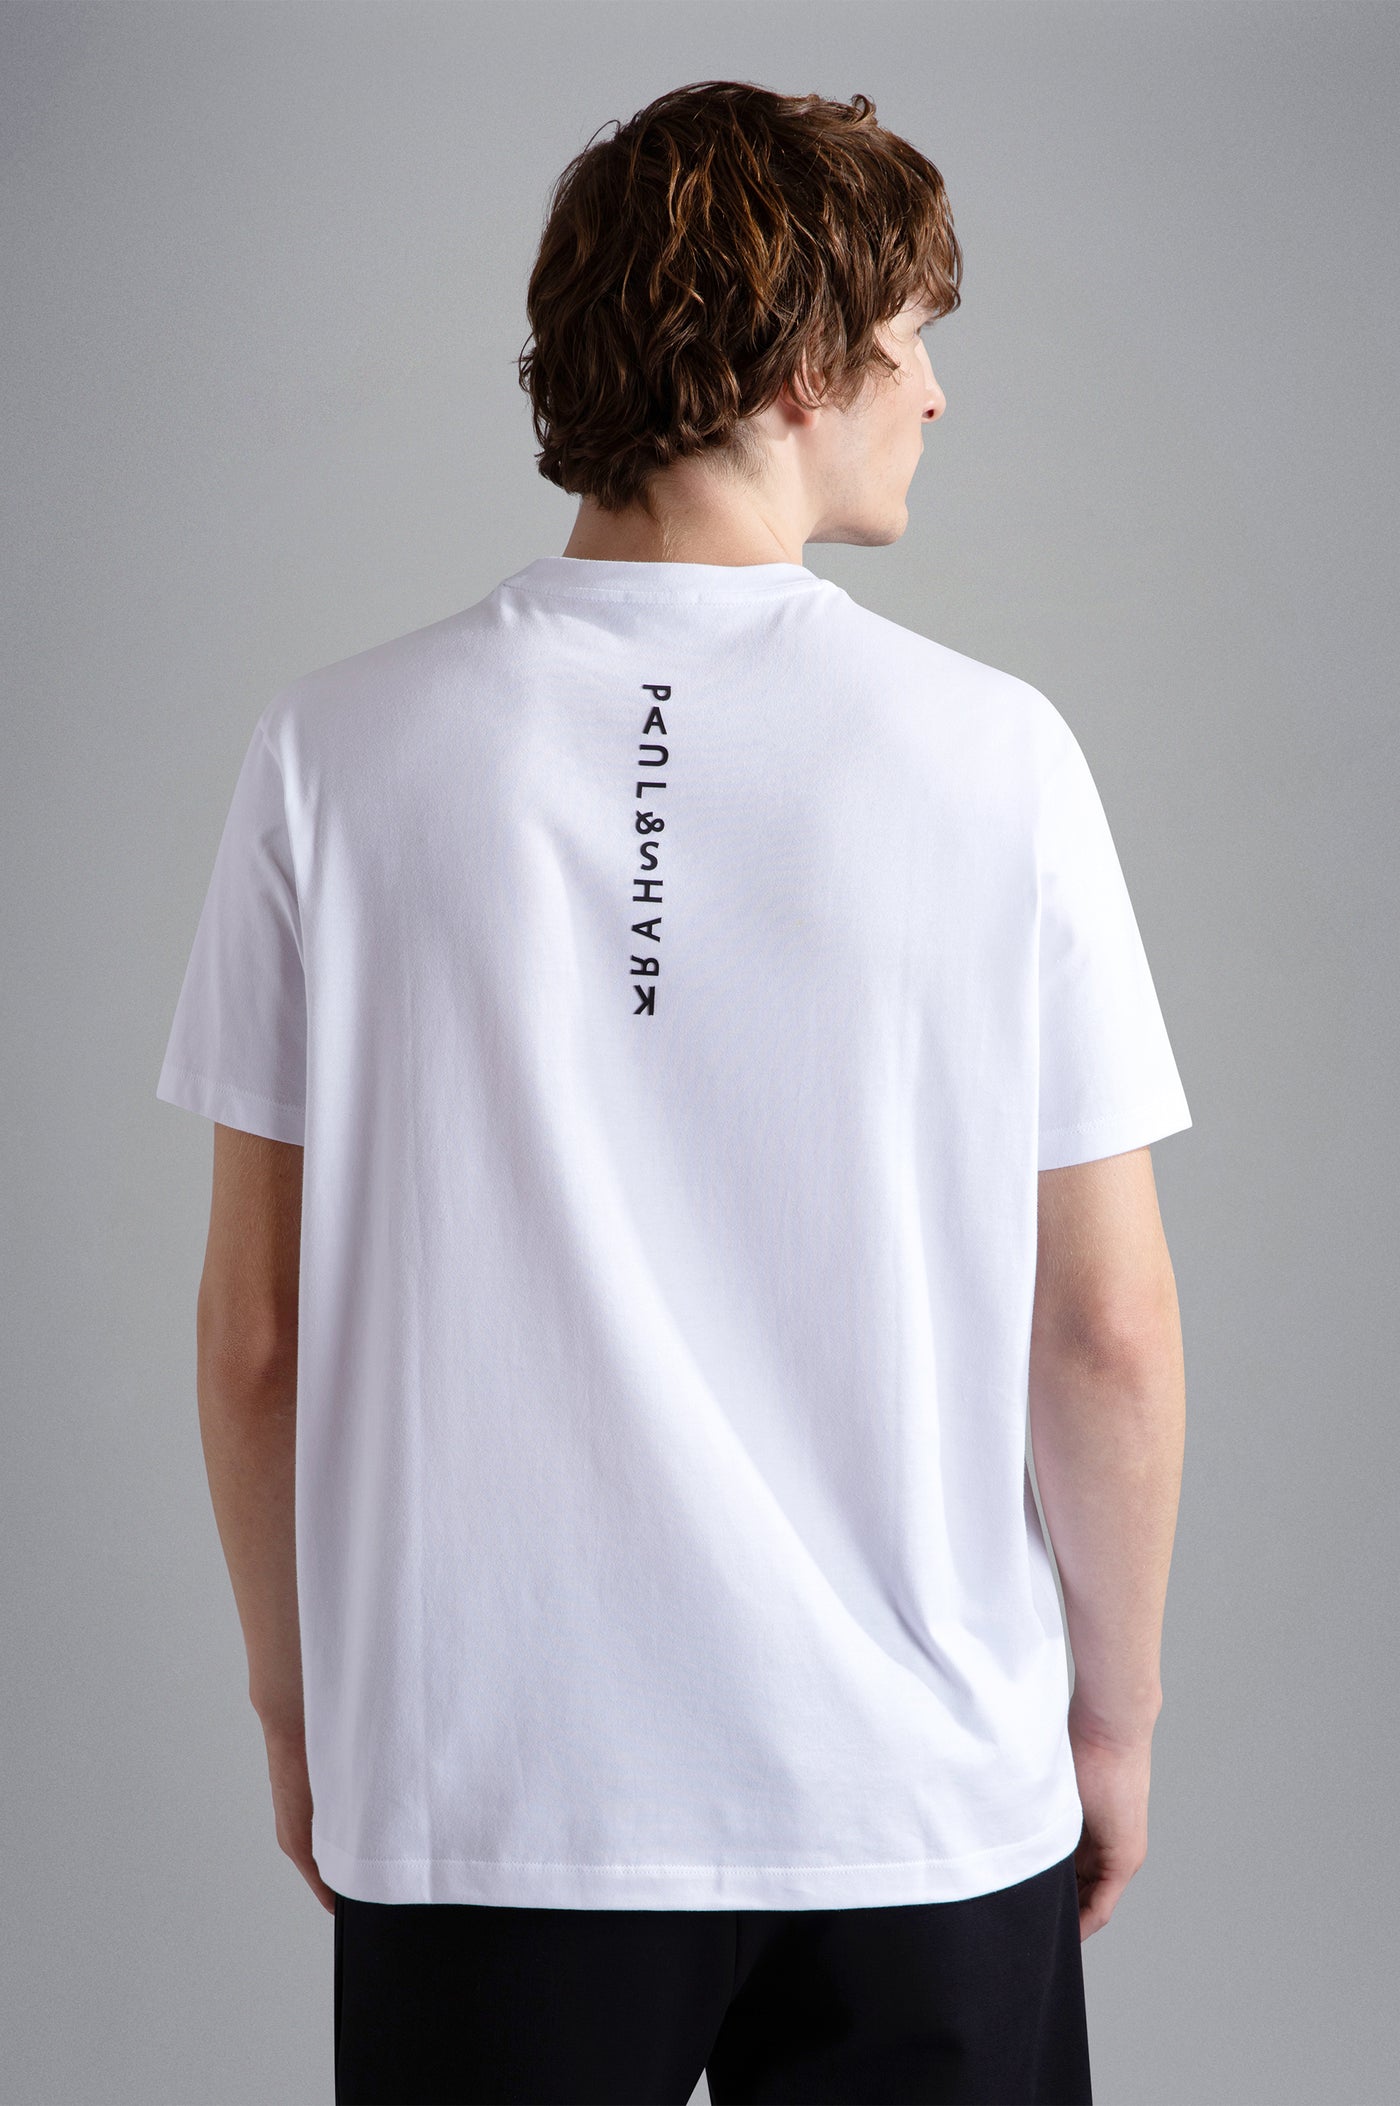 Paul & Shark Cotton Jersey T-shirt with Embroidery and P&S Print | White